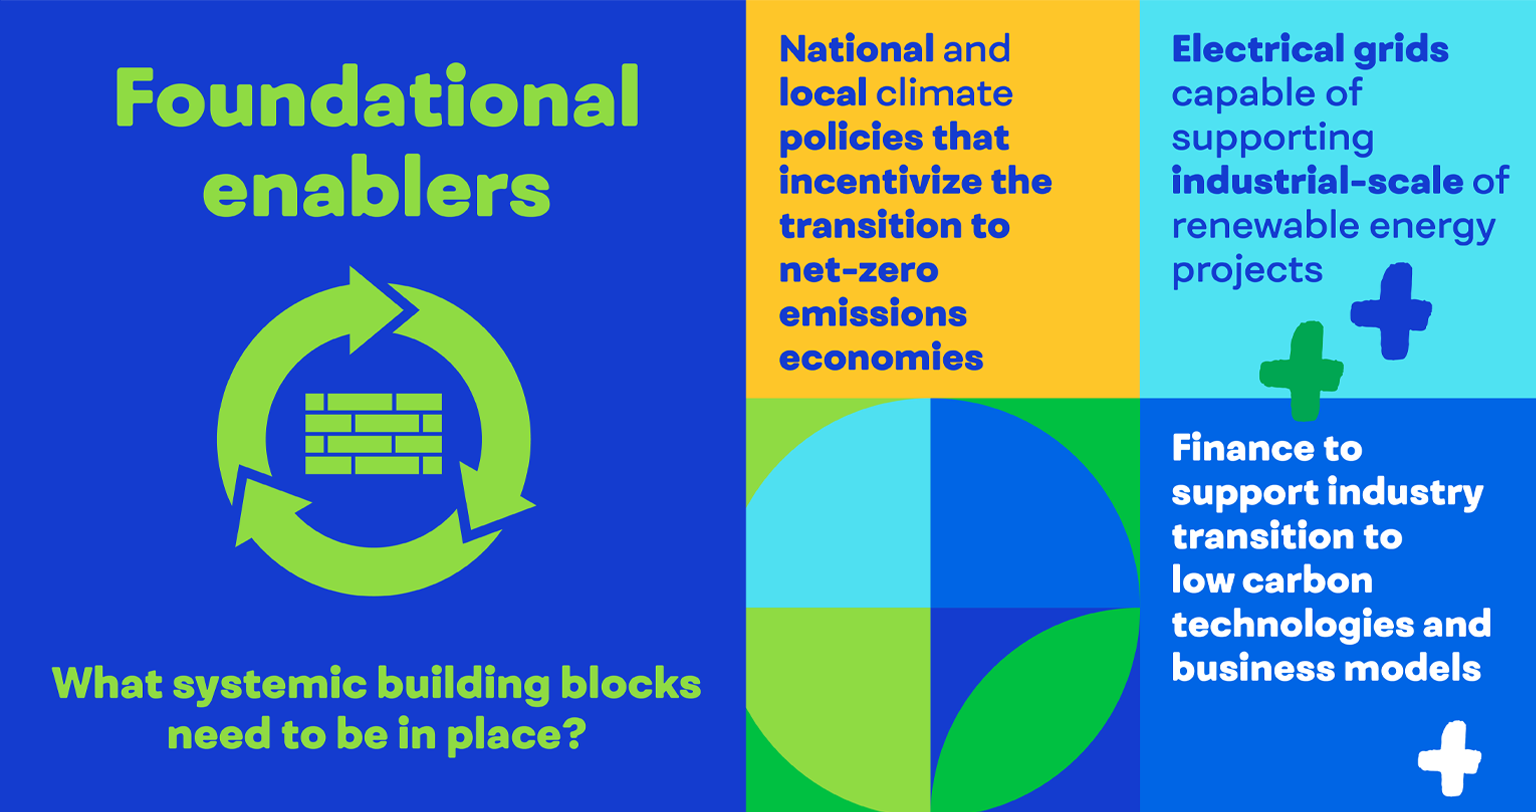 Foundational enablers: What systemic building blocks need to be in place?